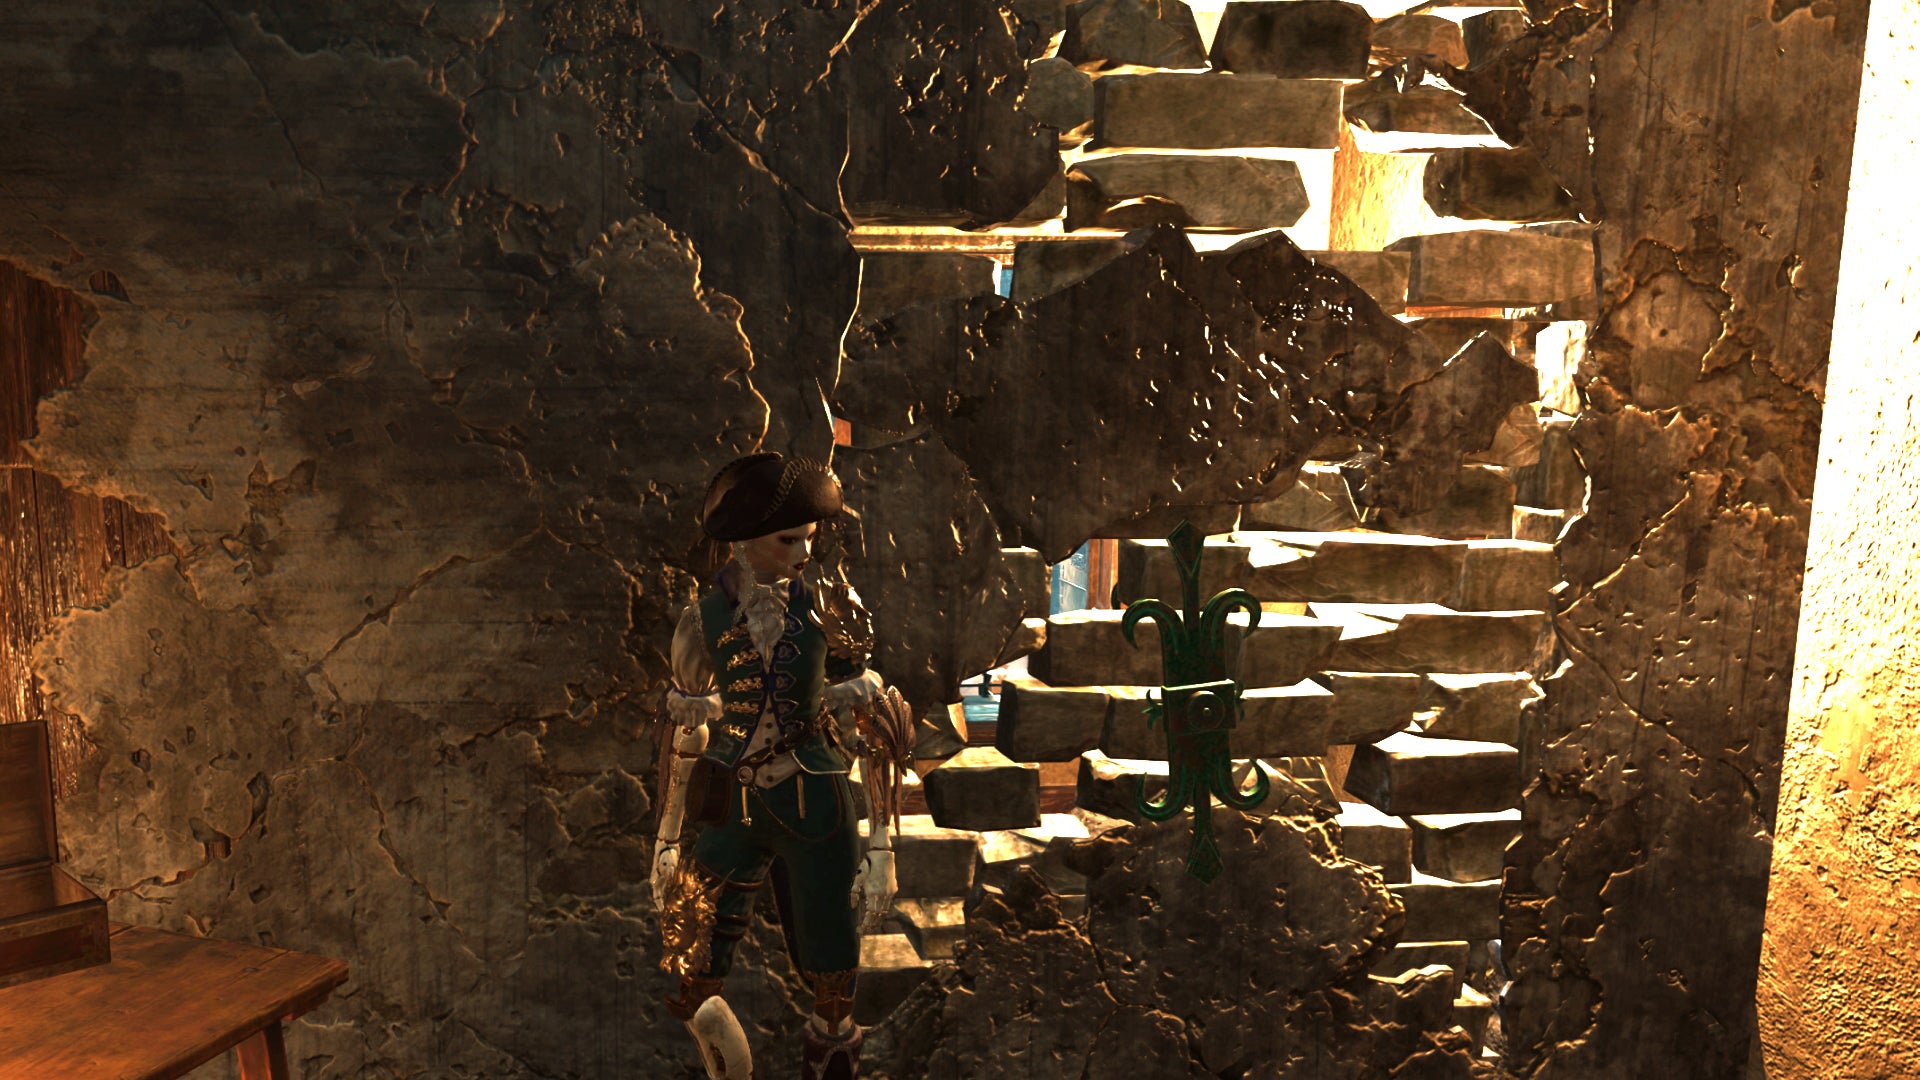 The player in Steelrising stands next to a breakable wall which can be broken open using the Alchemist's Ram tool.